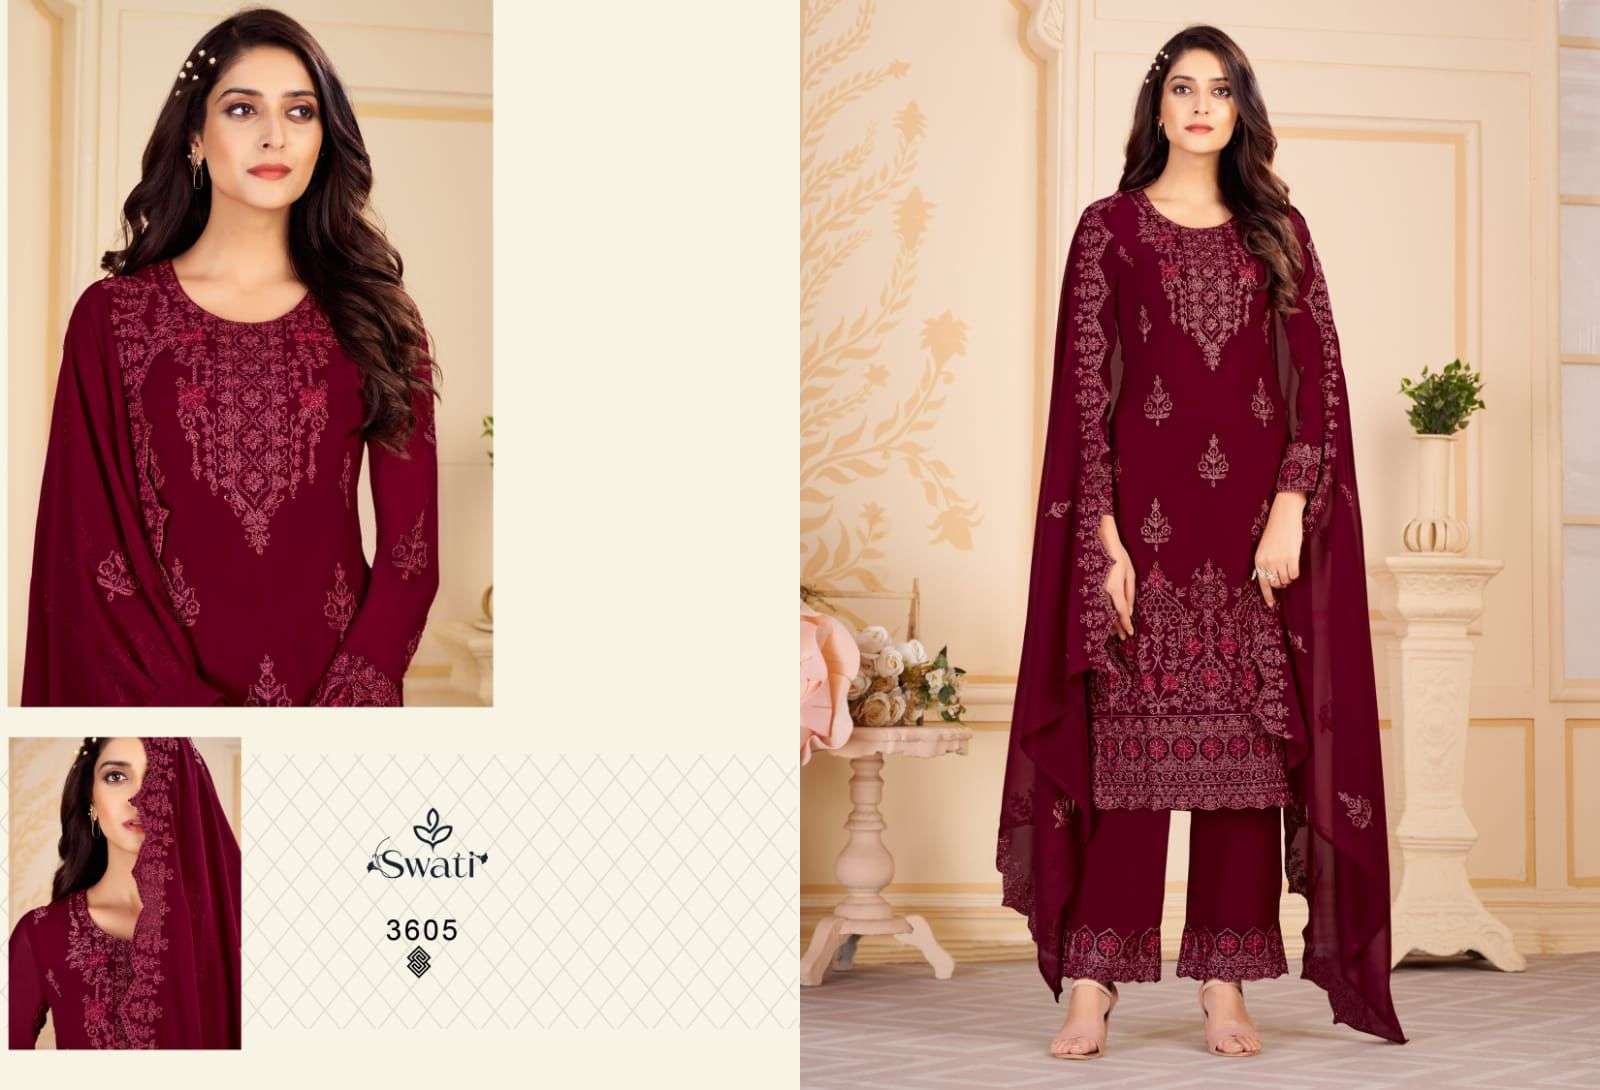 Swati 3601 Series By Swagat 3601 To 3607 Series Beautiful Stylish Suits Fancy Colorful Casual Wear & Ethnic Wear & Ready To Wear Faux Georgette Dresses At Wholesale Price